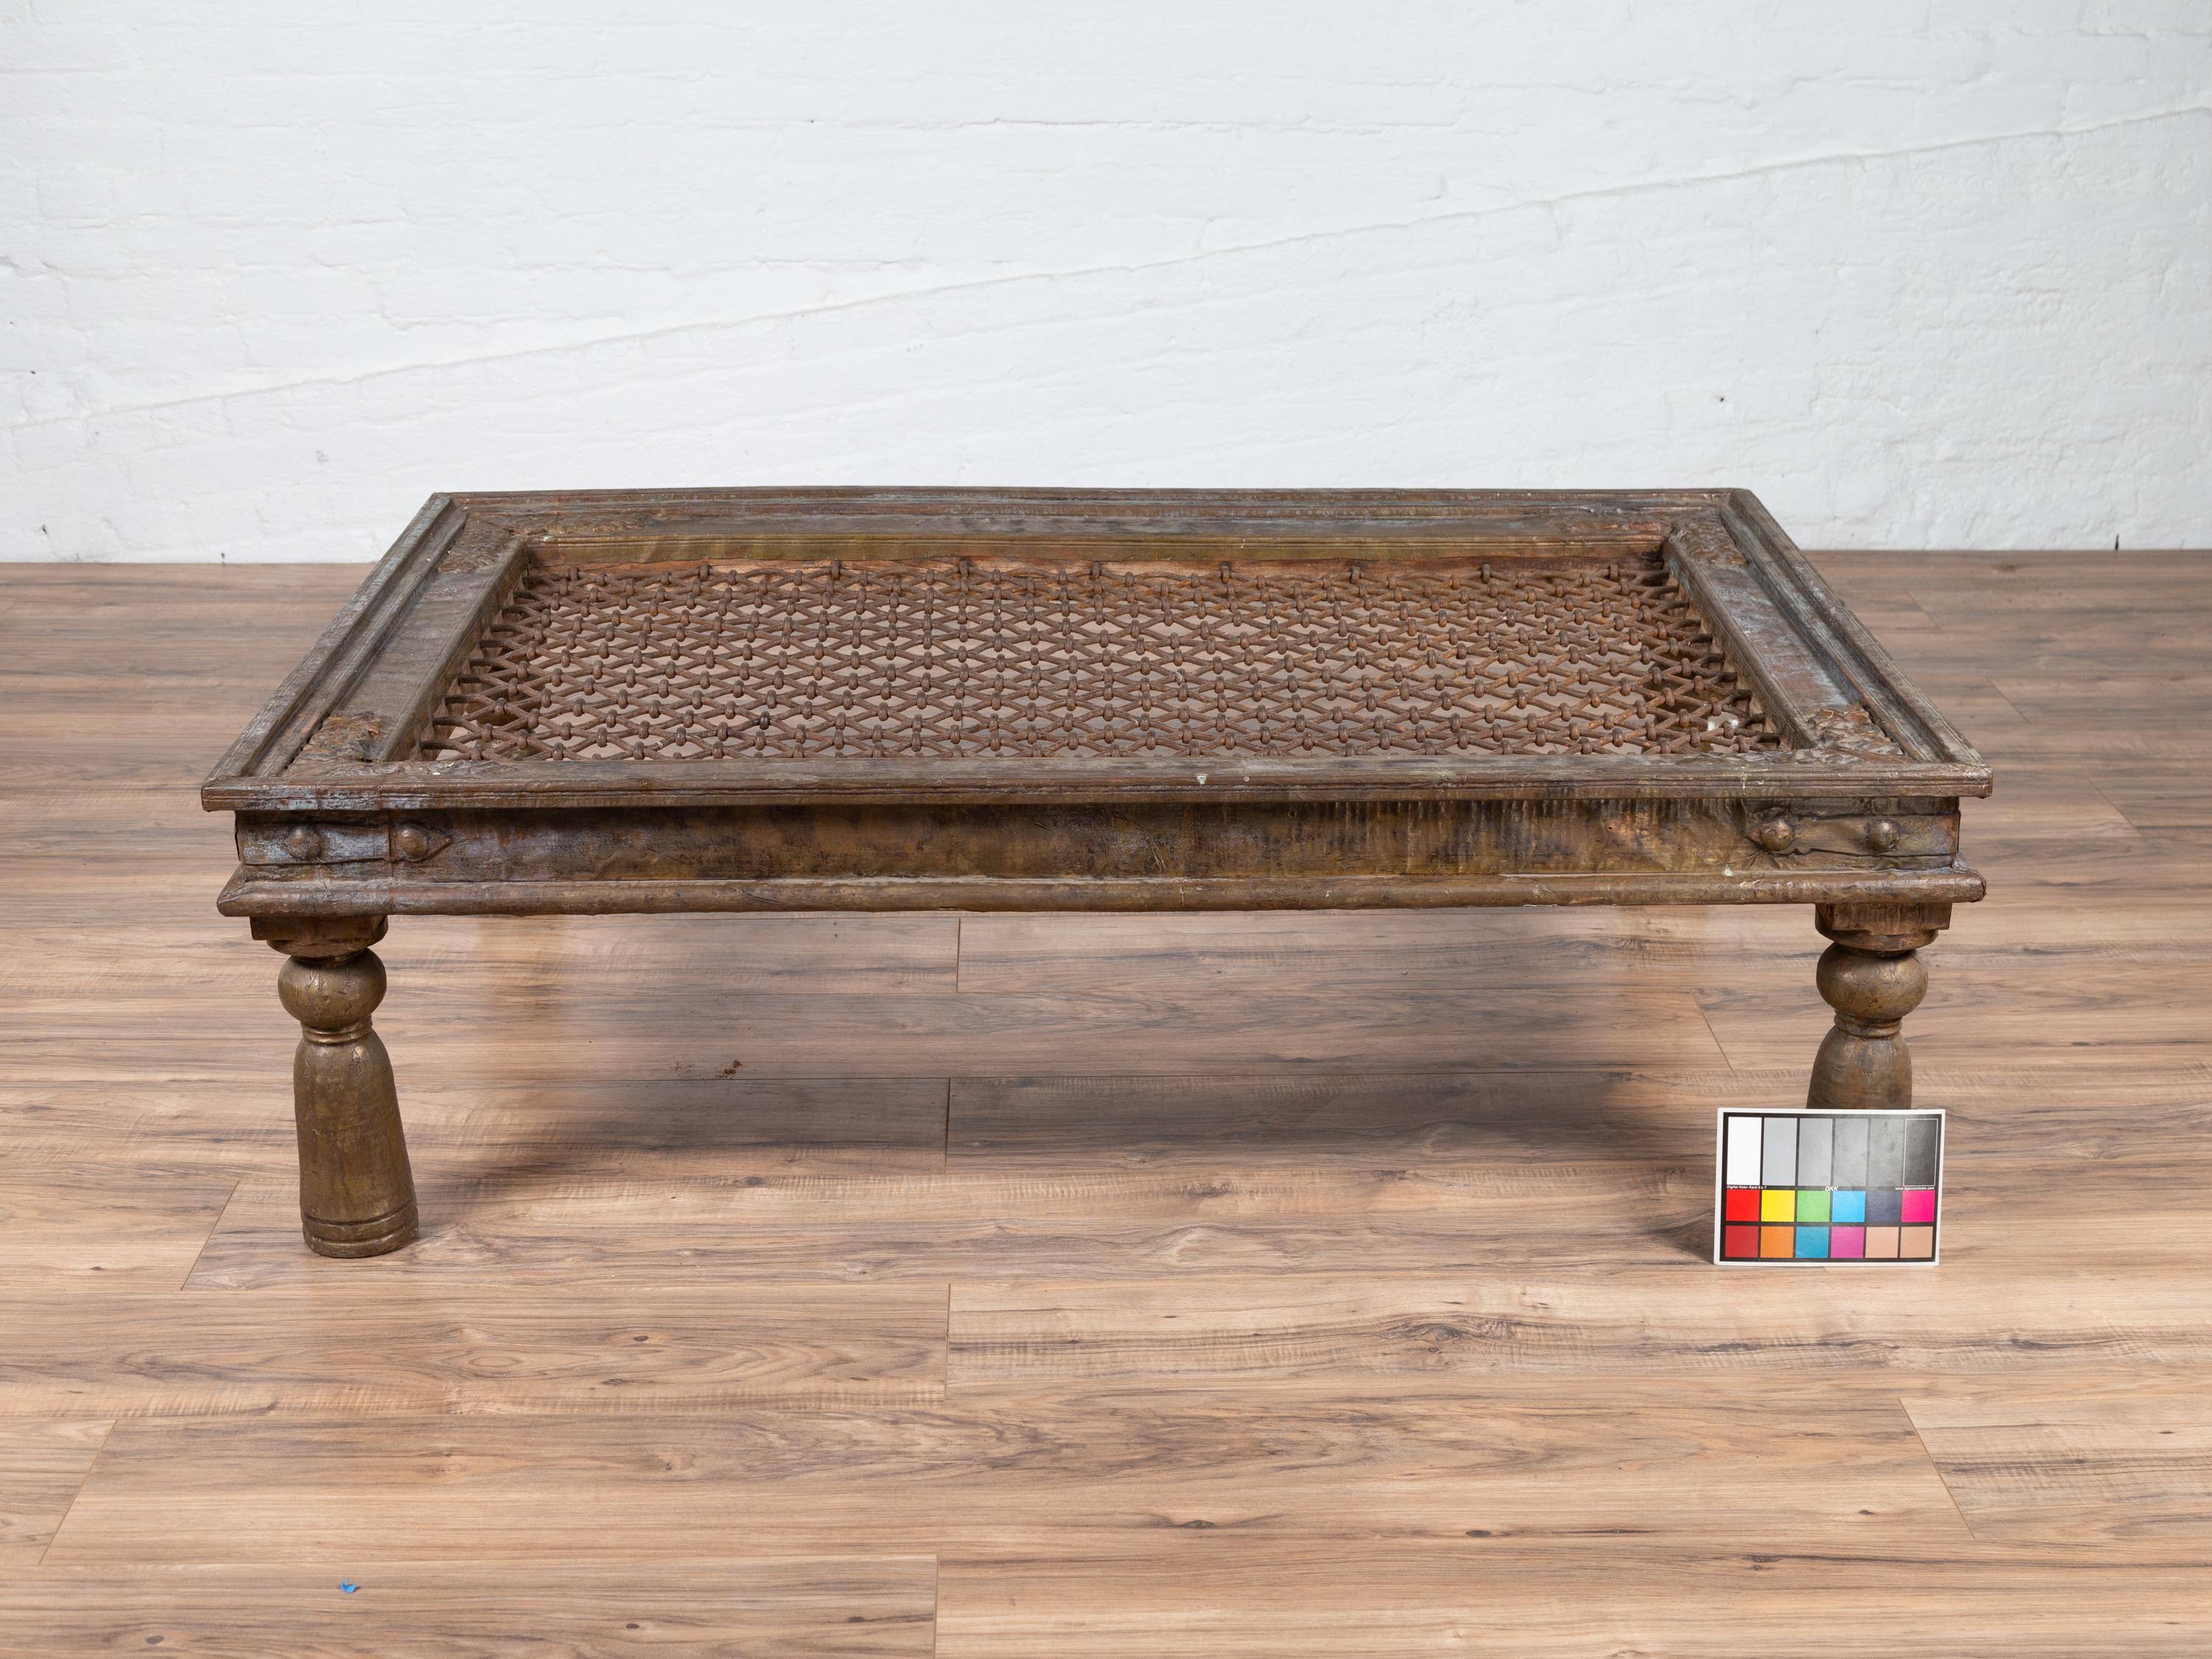 Antique Indian Window Grate Made into a Coffee Table with Metal Sheathing 8